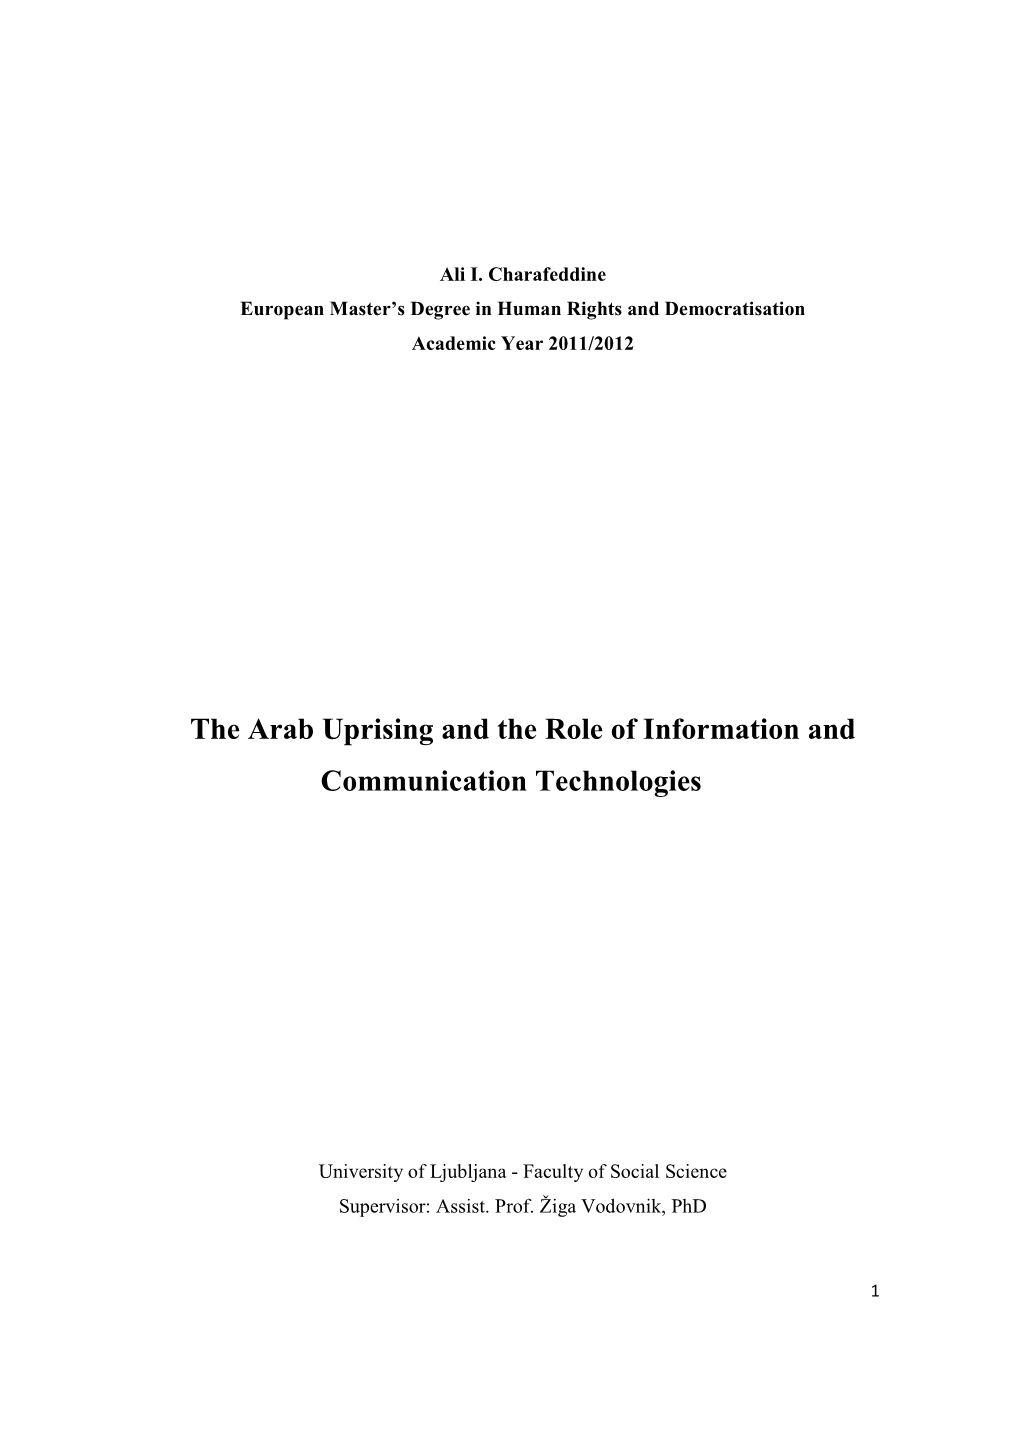 The Arab Uprising and the Role of Information and Communication Technologies